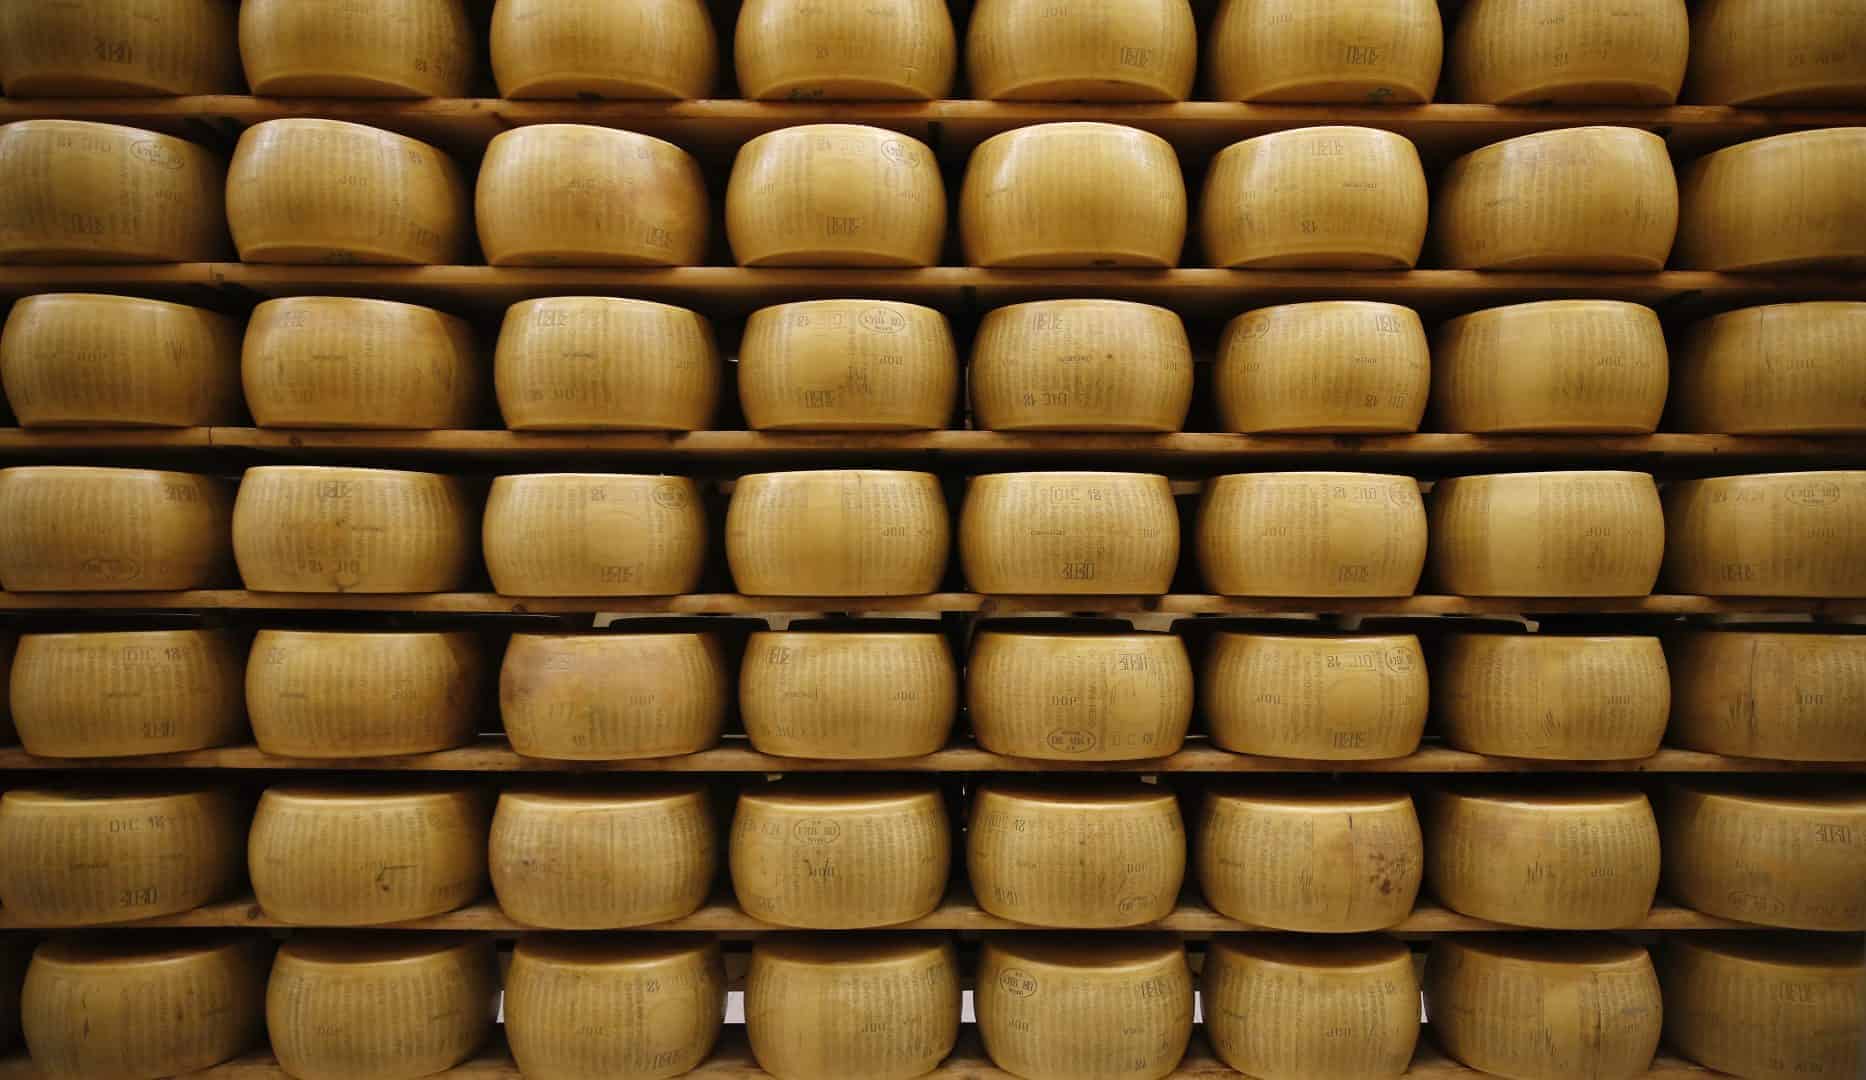 Americans stockpile Parmesan cheese ahead of US trade war that will hit British jumpers and Scotch whisky too